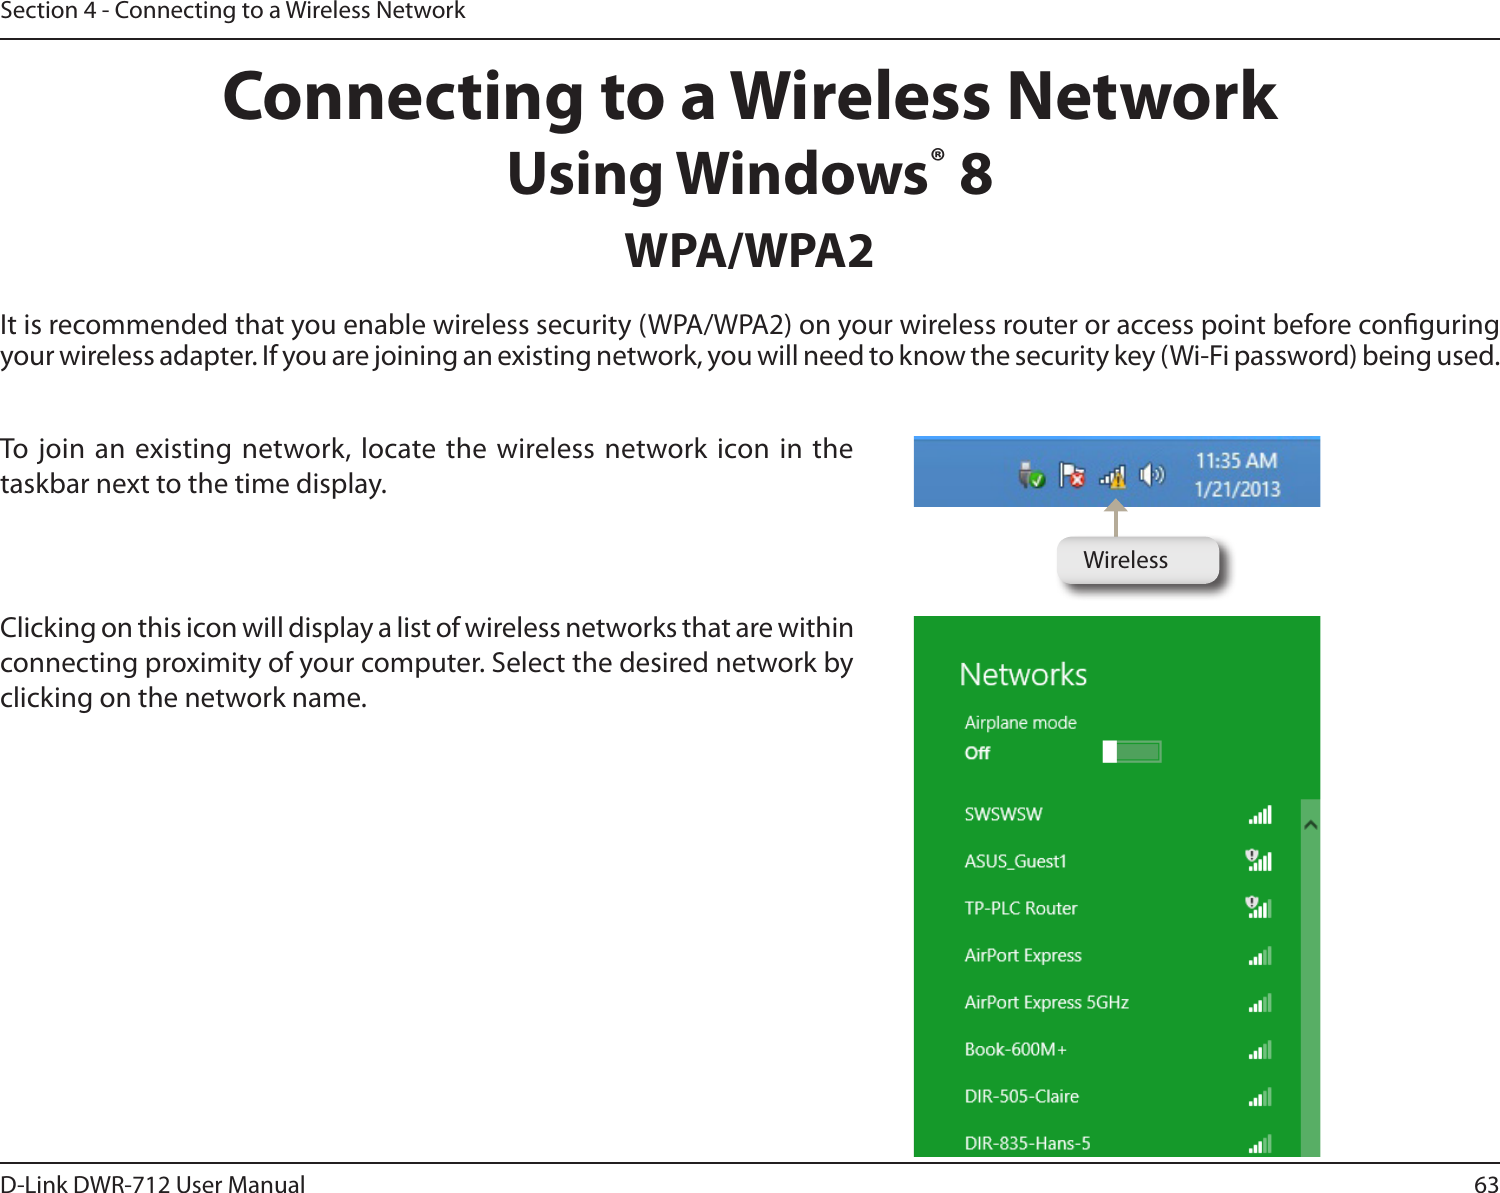 63D-Link DWR-712 User ManualSection 4 - Connecting to a Wireless NetworkConnecting to a Wireless NetworkUsing Windows® 8WPA/WPA2It is recommended that you enable wireless security (WPA/WPA2) on your wireless router or access point before conguring your wireless adapter. If you are joining an existing network, you will need to know the security key (Wi-Fi password) being used.To join an existing network, locate the wireless network icon in the taskbar next to the time display.  Clicking on this icon will display a list of wireless networks that are within connecting proximity of your computer. Select the desired network by clicking on the network name.Wireless